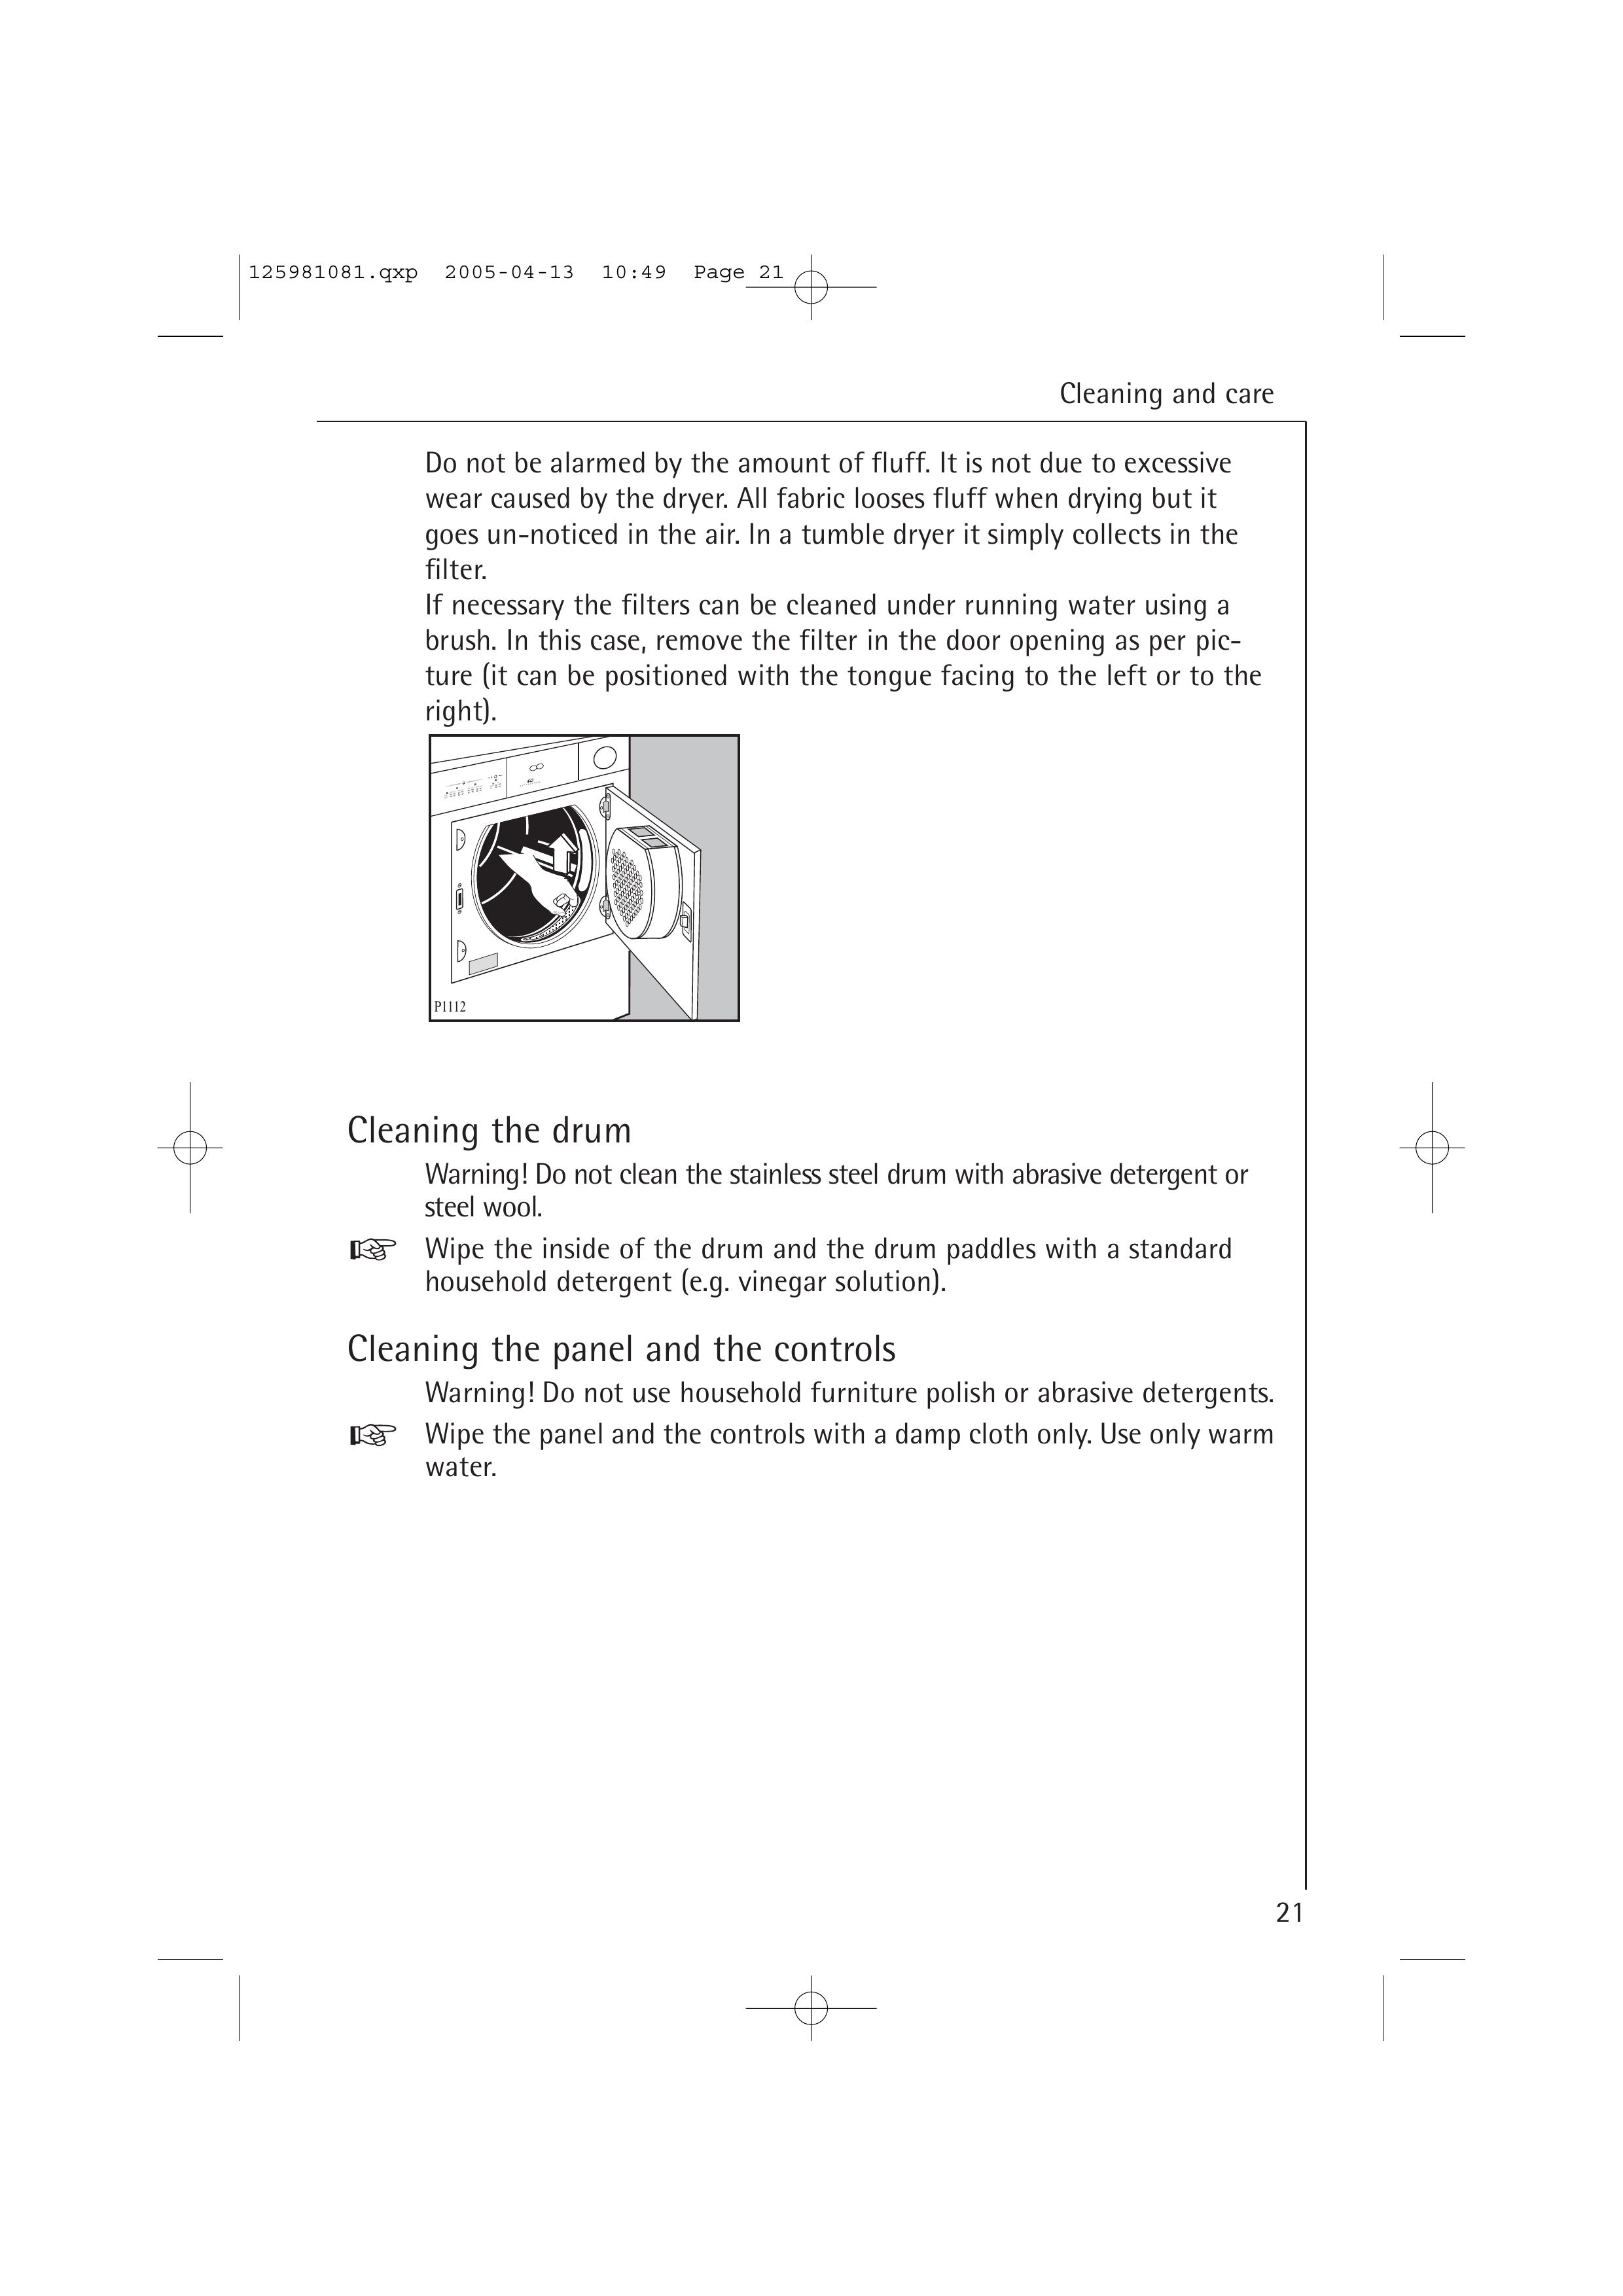 AEG T37400 Clothes Dryer User Manual (Page 21)